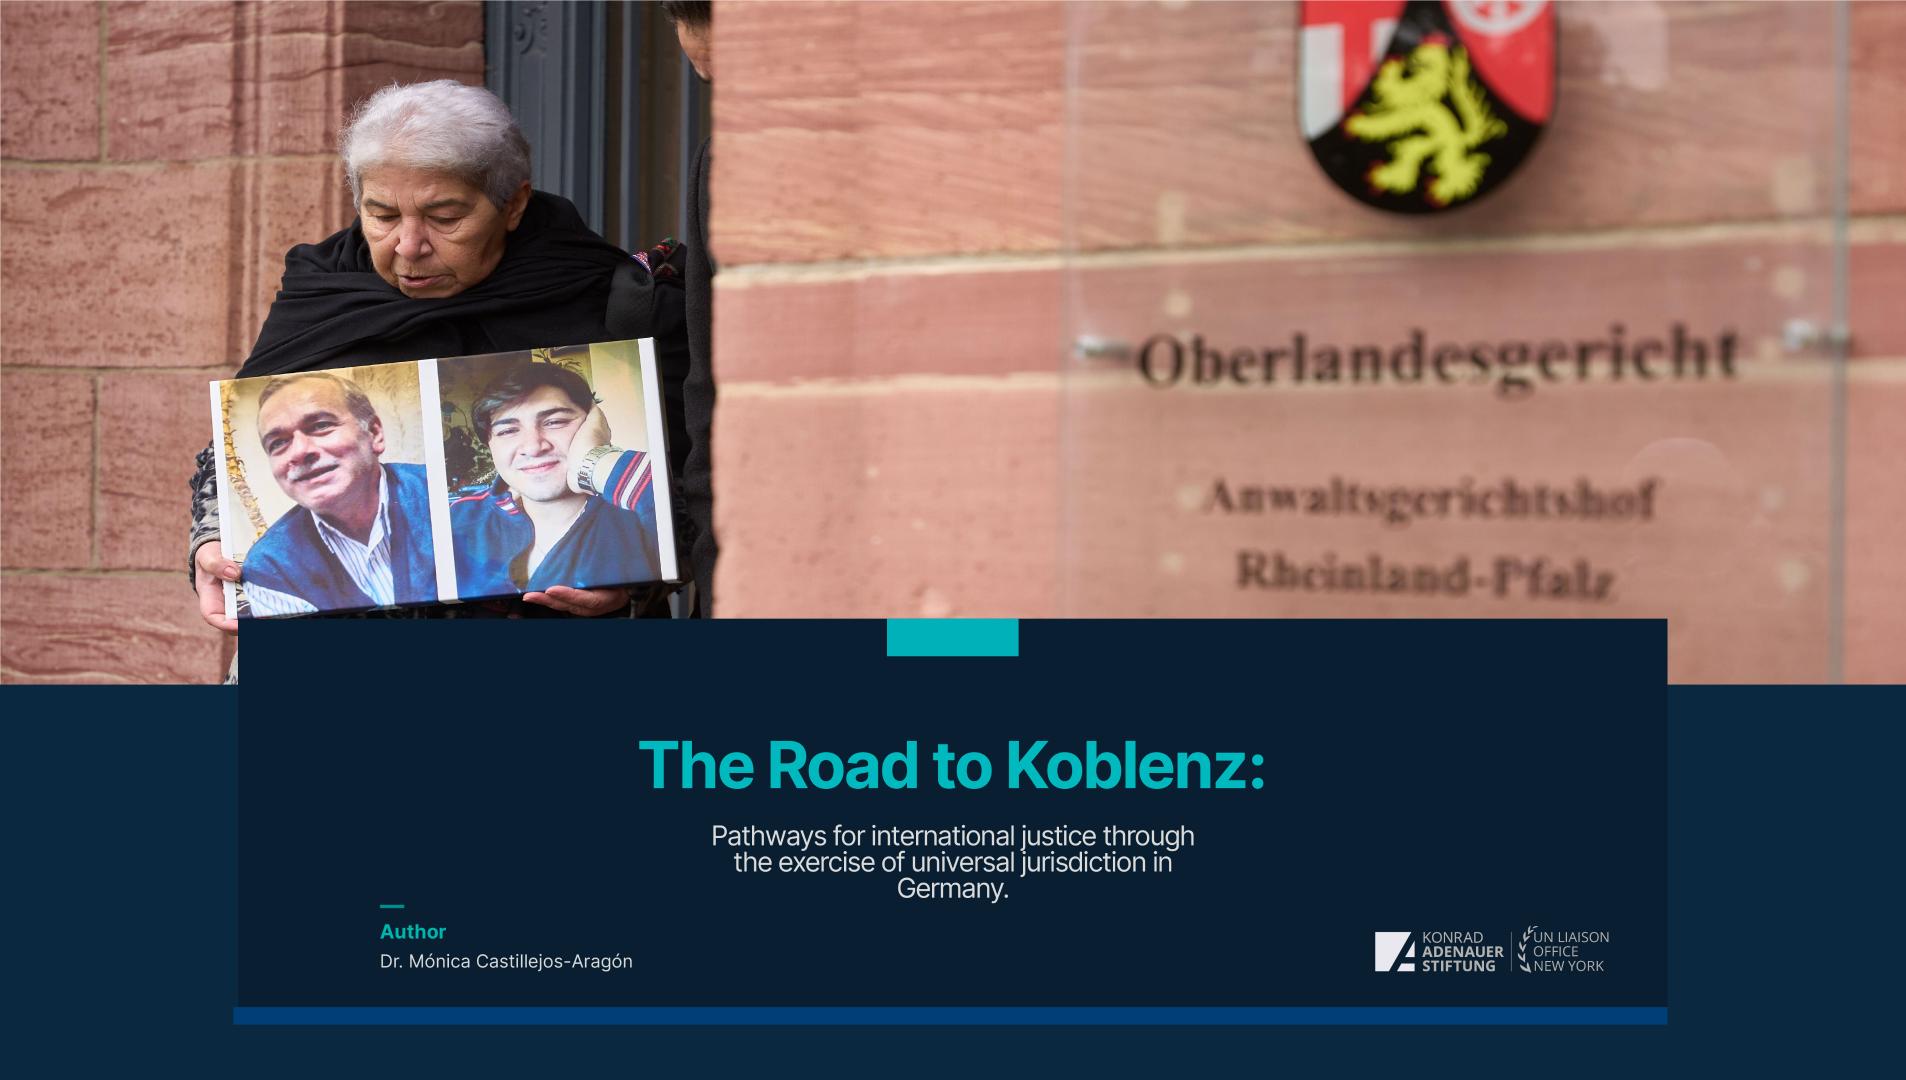 The road to Koblenz